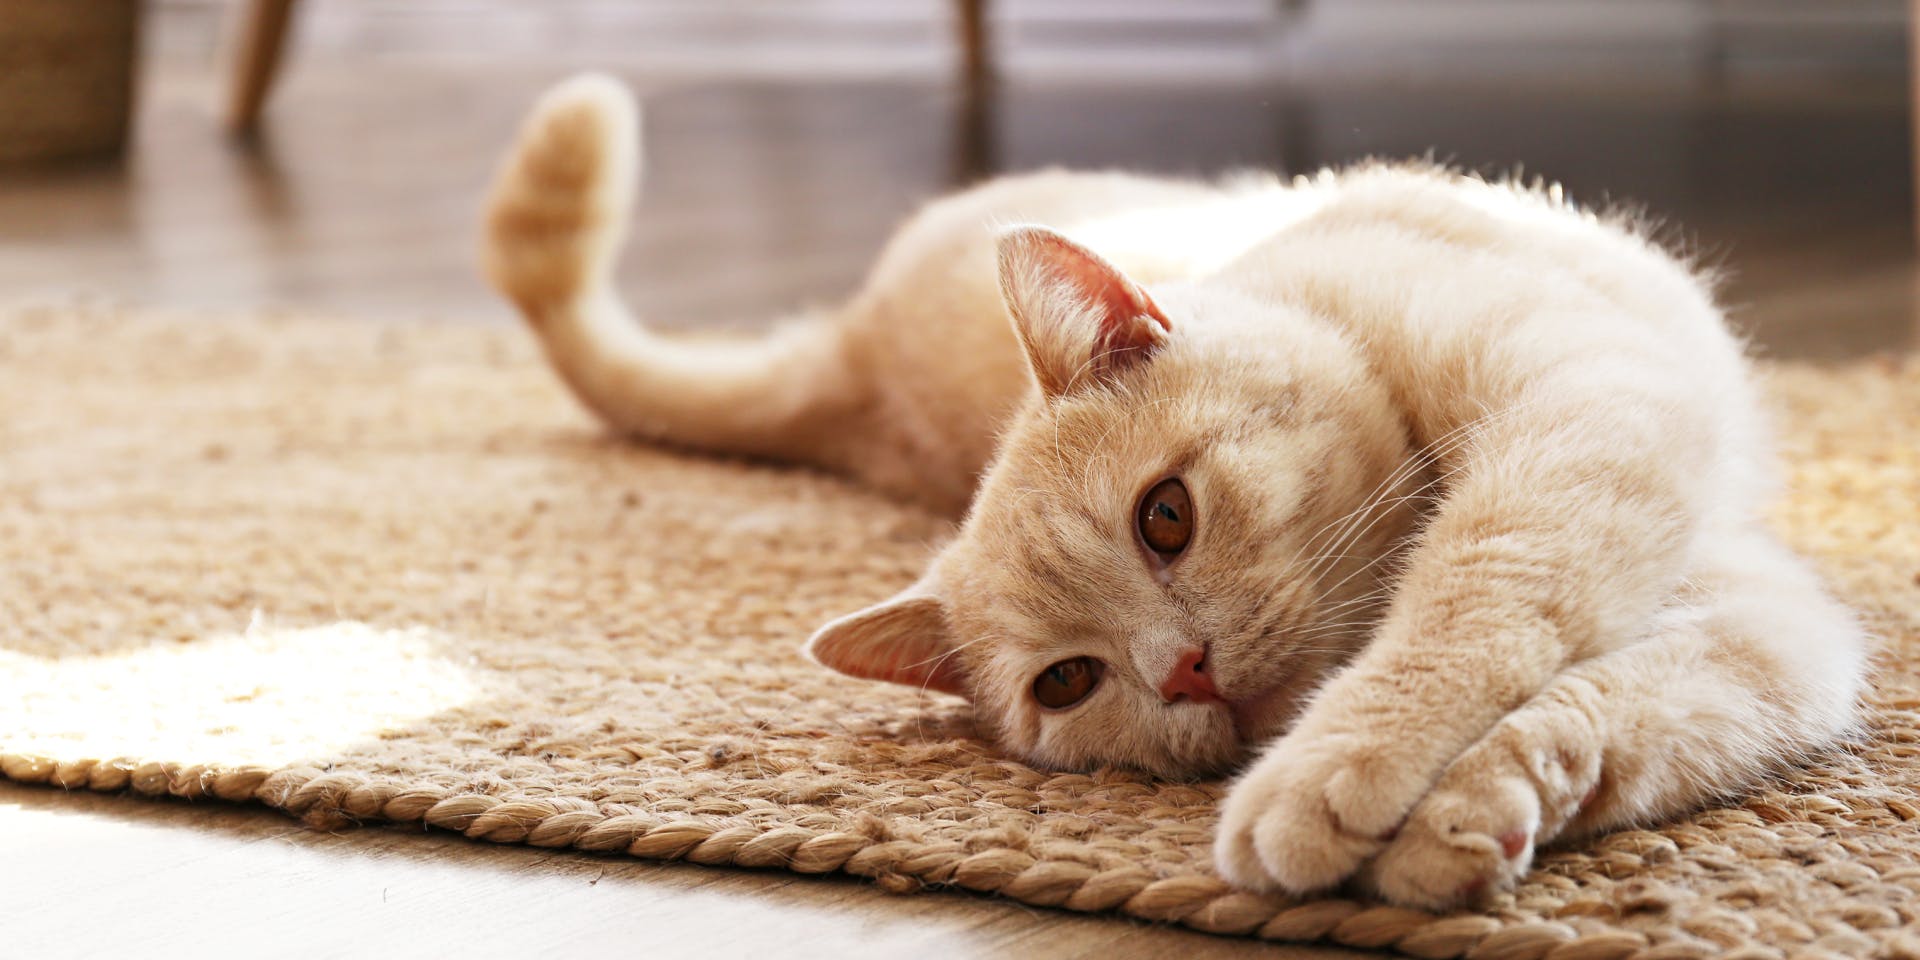 A ginger cat stretched out on a rug.